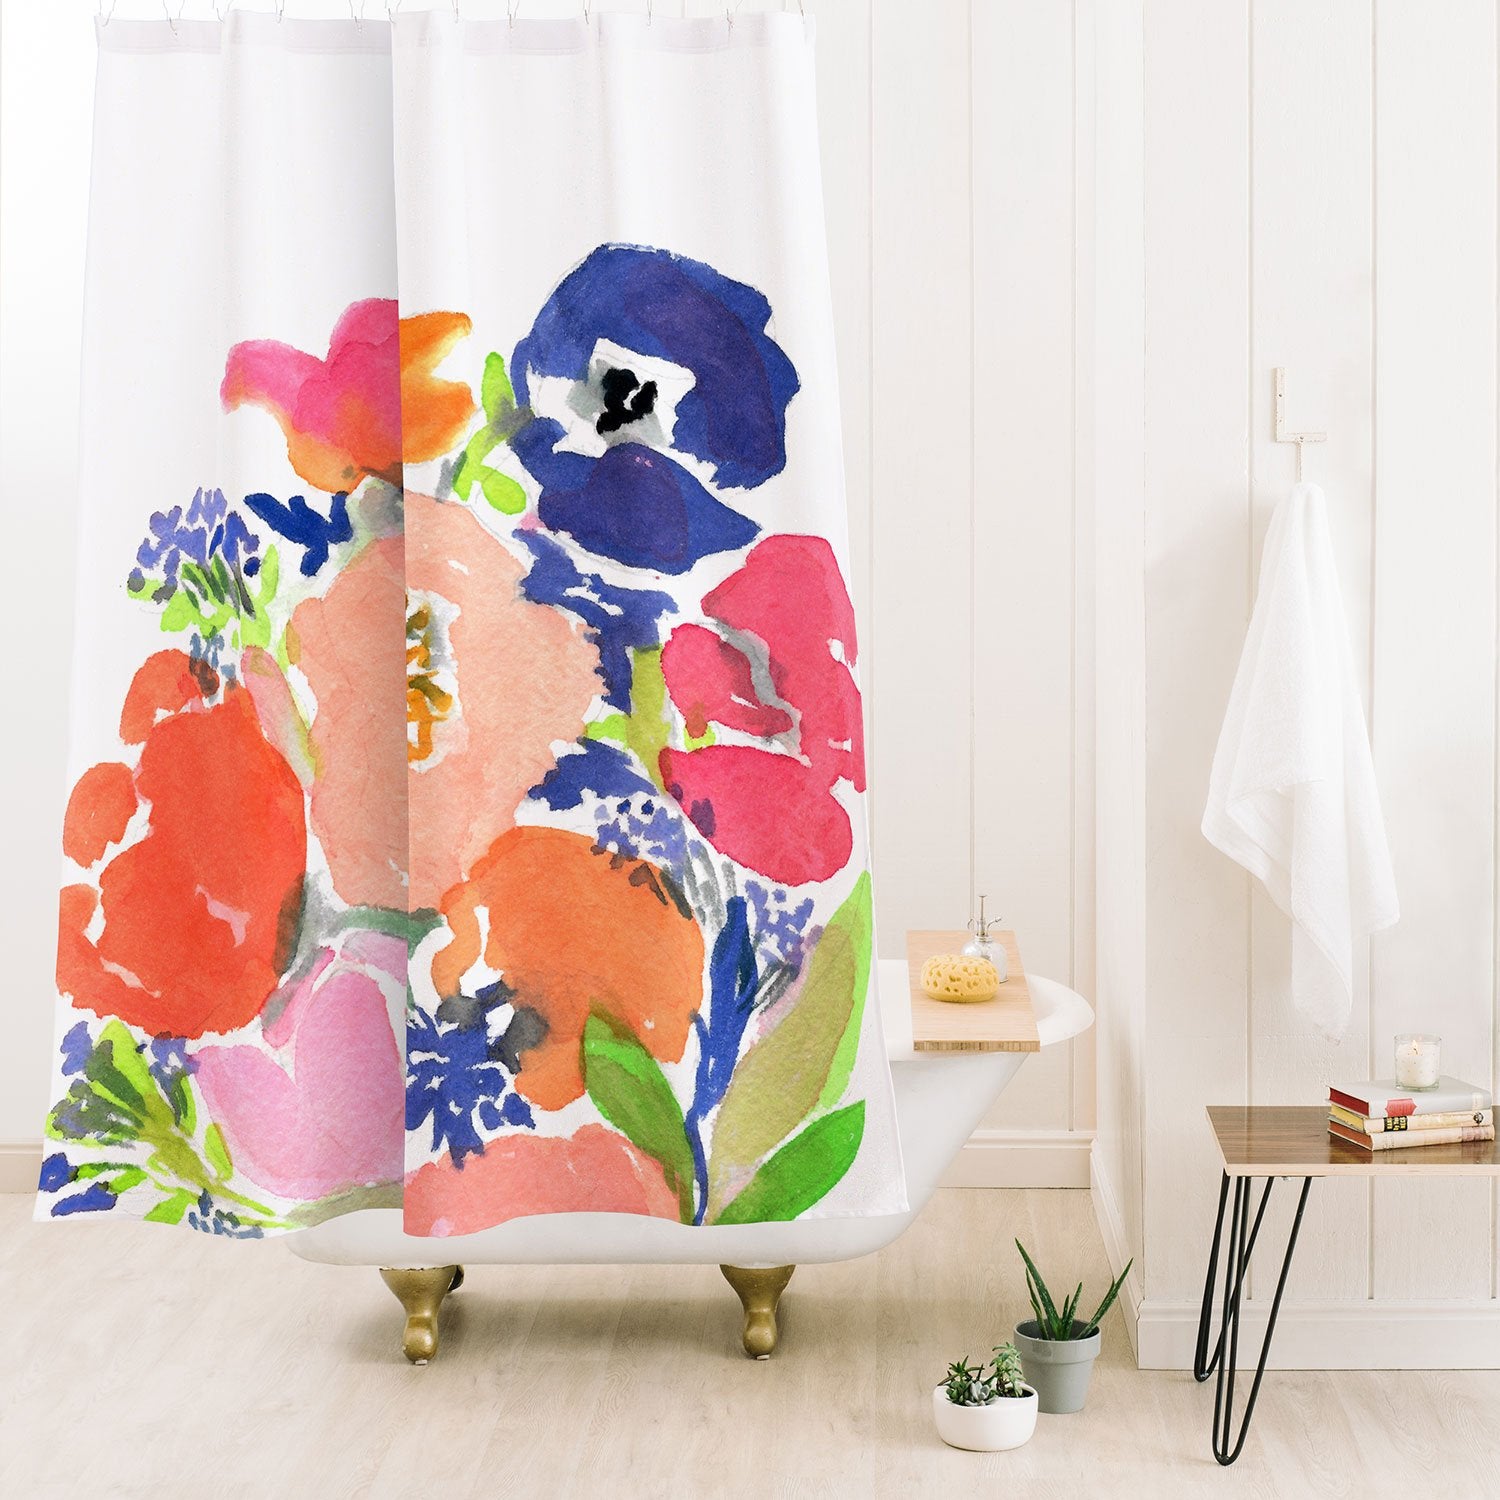 Floral Frenzy Shower Curtain